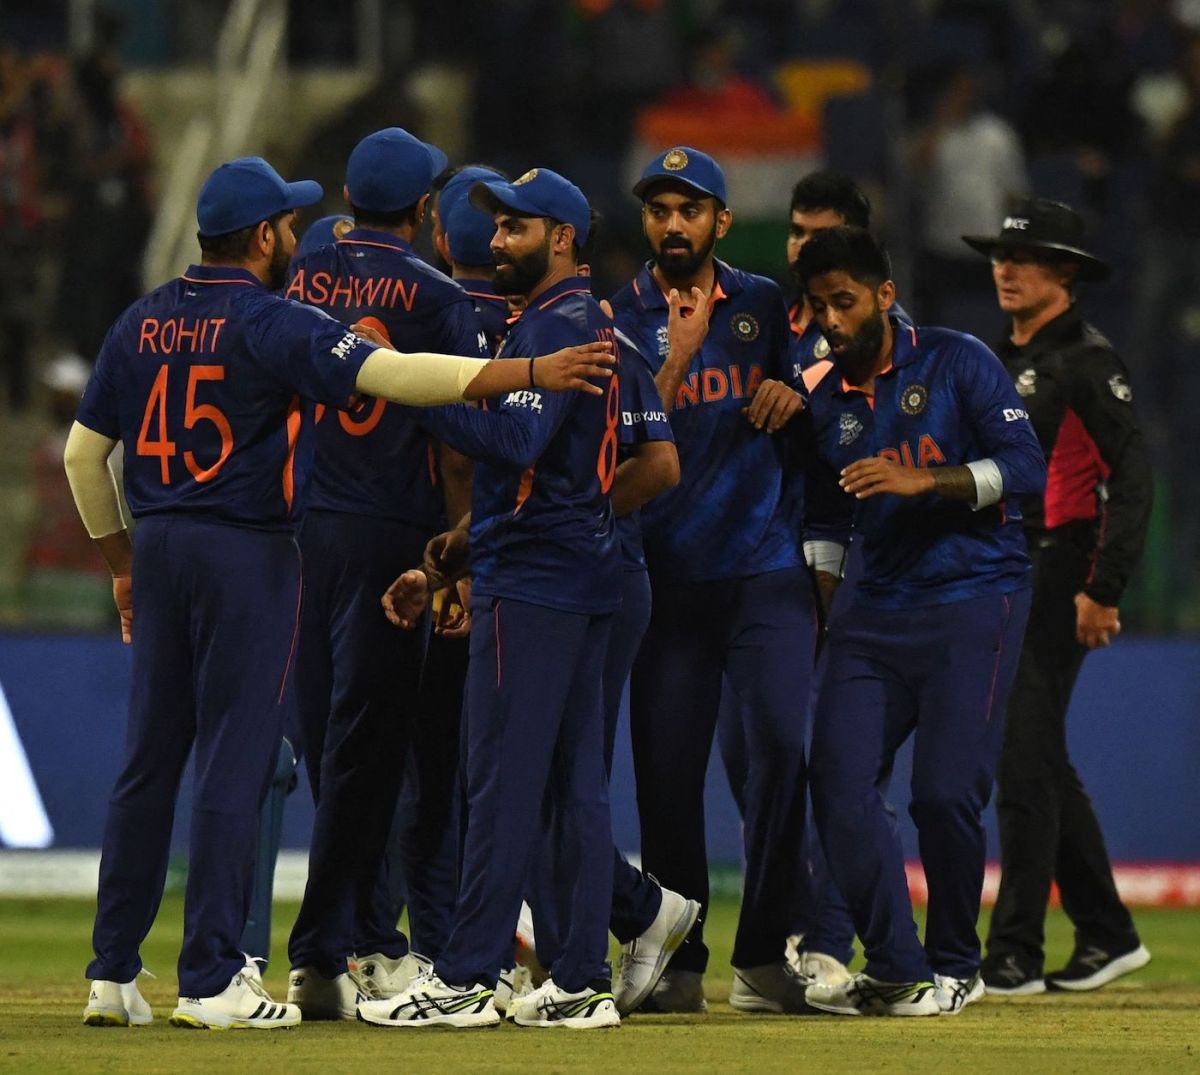 ICC T20 World Cup 2021: India vs Scotland – When And Where To Watch The Match?